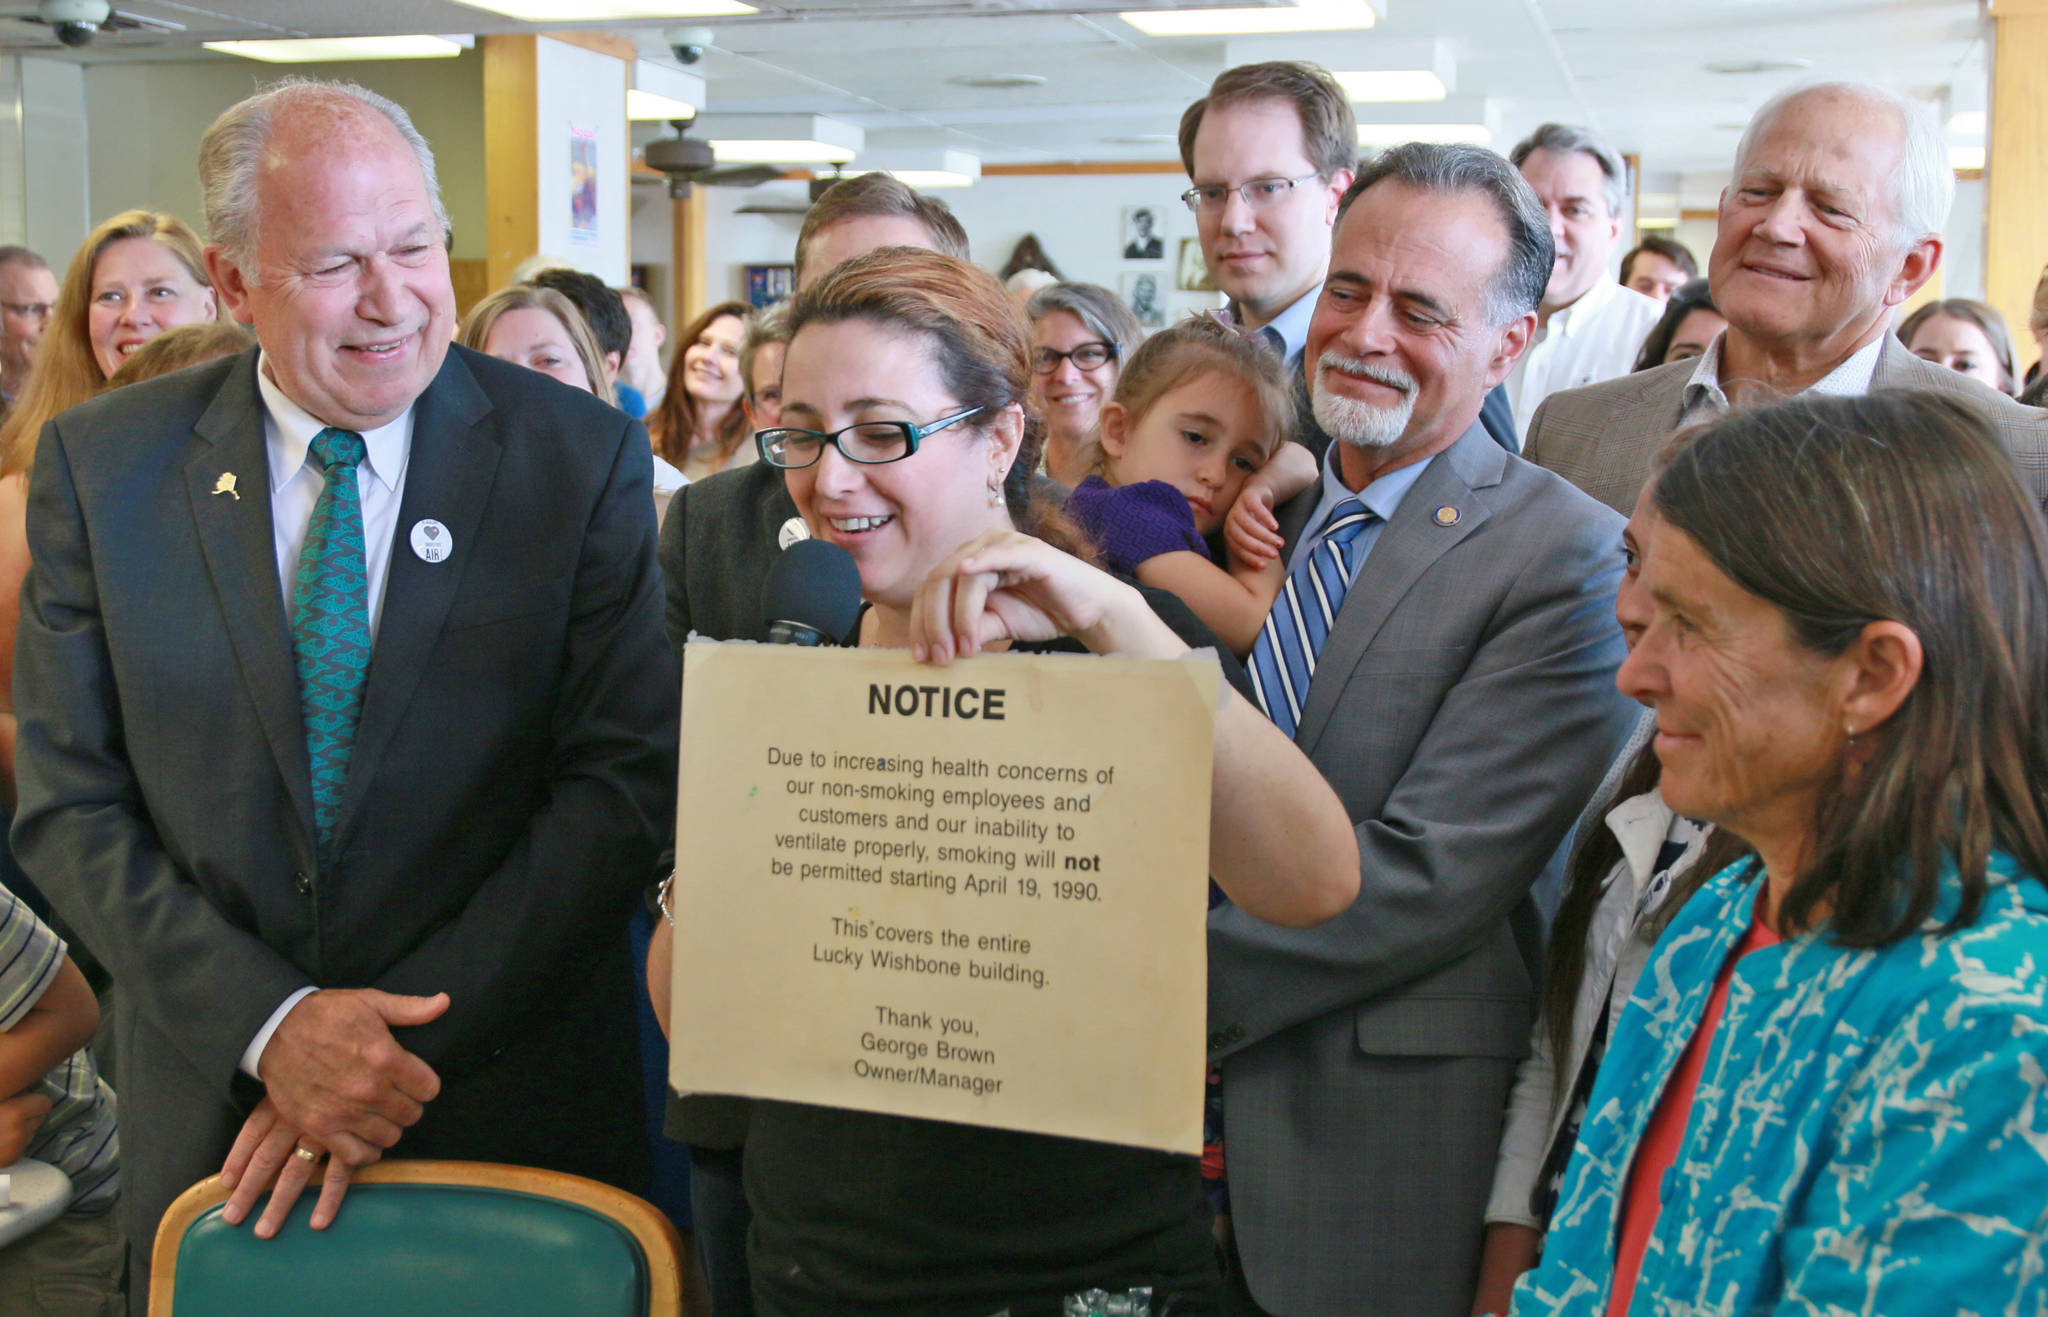 In a photo provided by the office of the governor, Gov. Bill Walker signs Senate Bill 63, a statewide public smoking ban, on Tuesday, July 17, 2018 at the Lucky Wishbone restaurant in Anchorage. Standing at right is Sen. Peter Micciche, R-Soldotna, the legislative sponsor of the bill. On Walker’s lap is Stella Micciche, one of Micciche’s daughters. Also visible, from right to left behind Walker are Dr. Jay Butler, Alaska’s chief medical officer; Rep. Geran Tarr, D-Anchorage; Rep. Jason Grenn, I-Anchorage; Micciche; Rep. Chris Birch, R-Anchorage; and the smile of Emily Nenon of the American Cancer Society. (Courtesy photo)